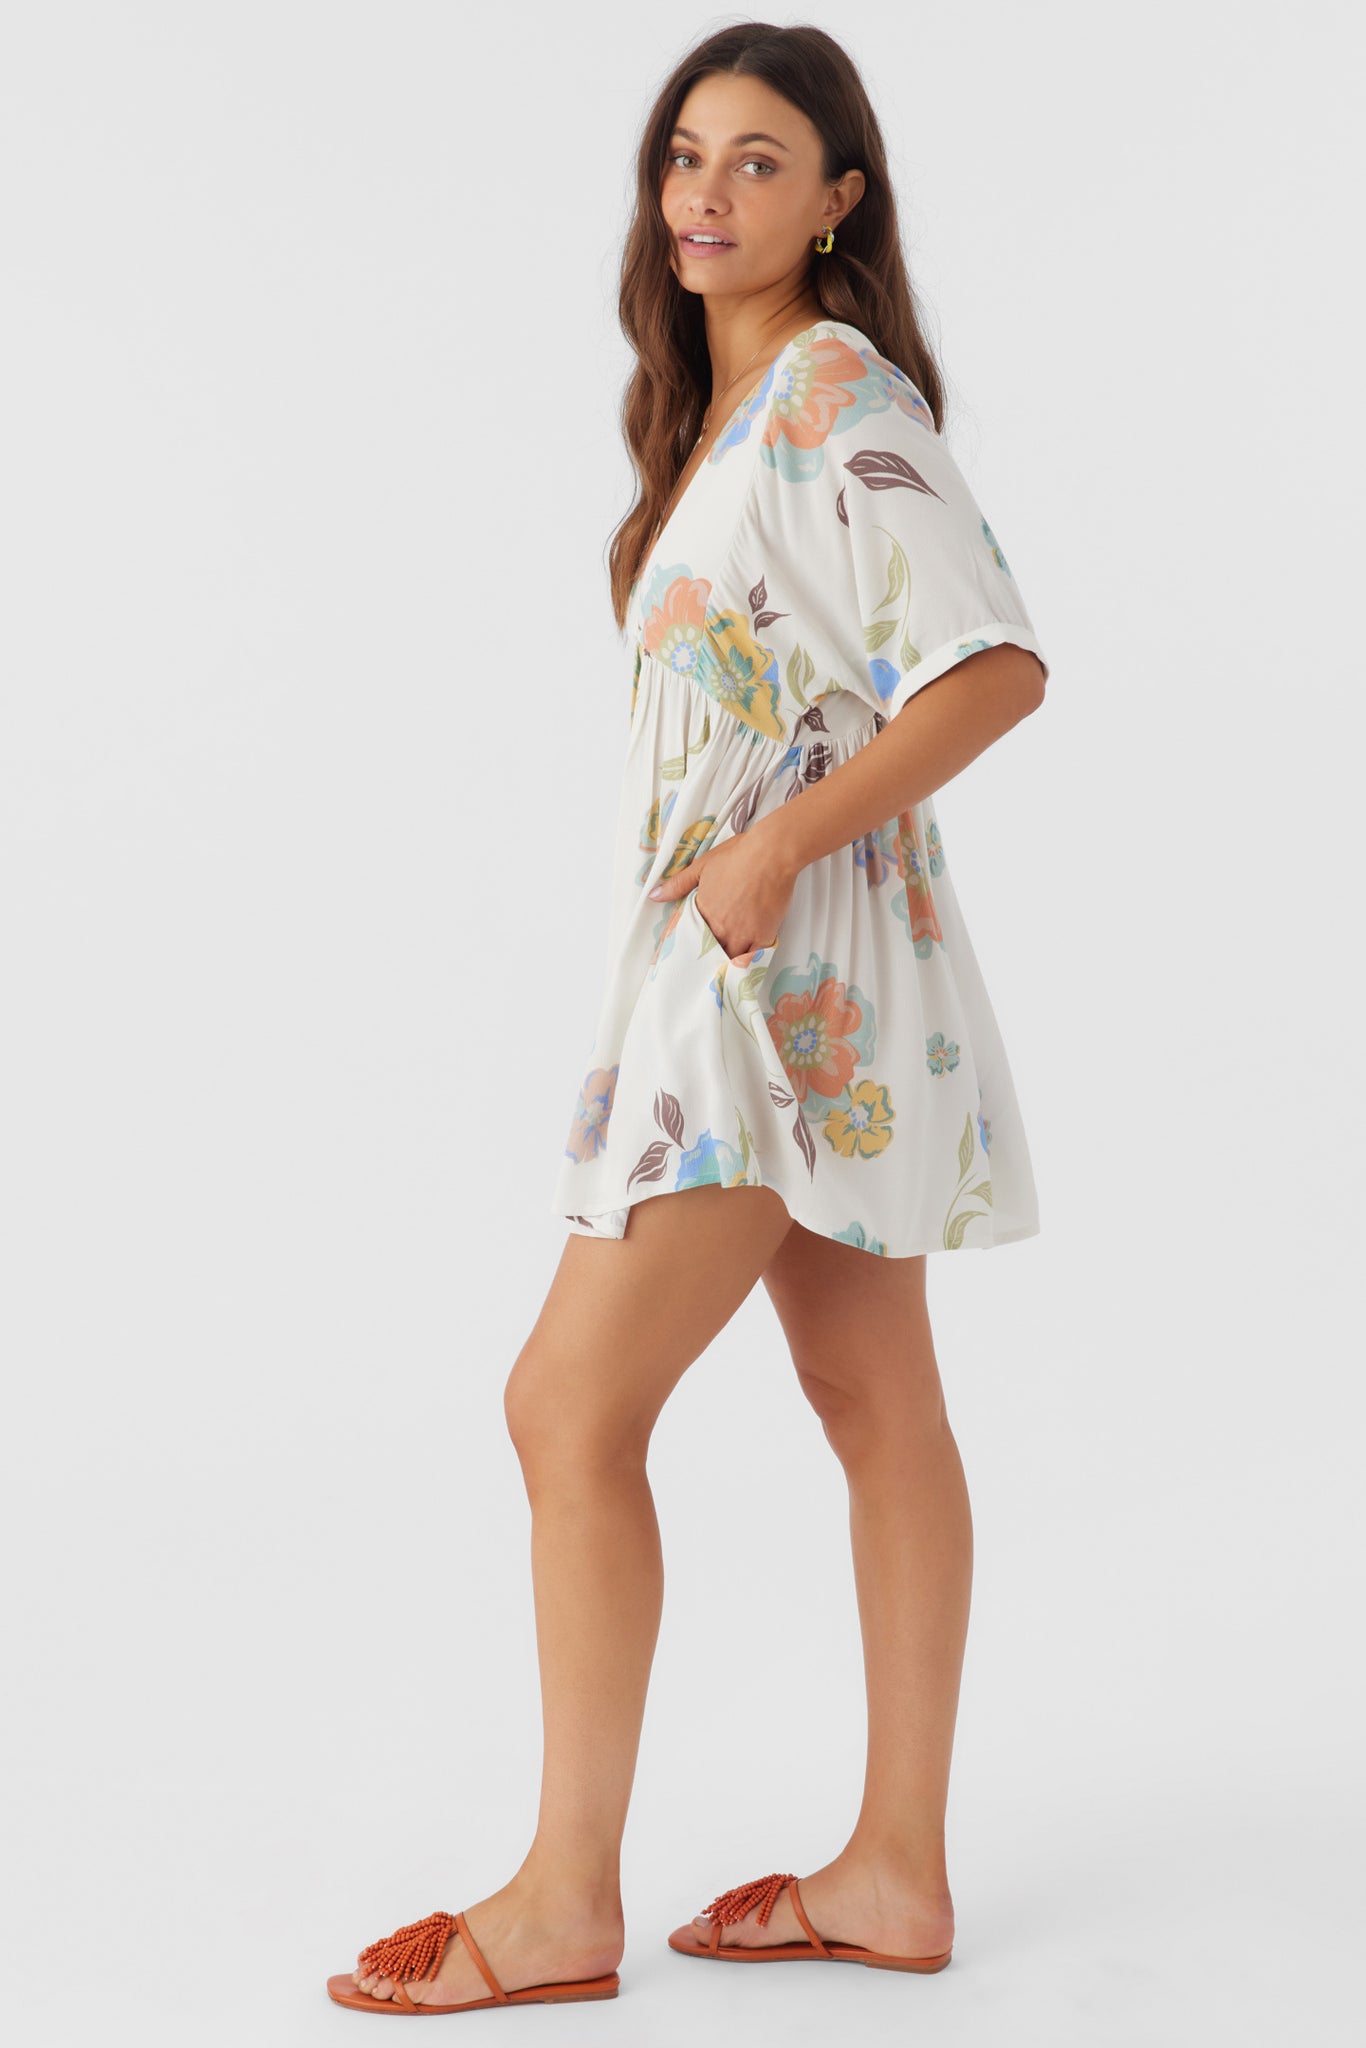 ROSEMARY NAAM FLORAL DRESS